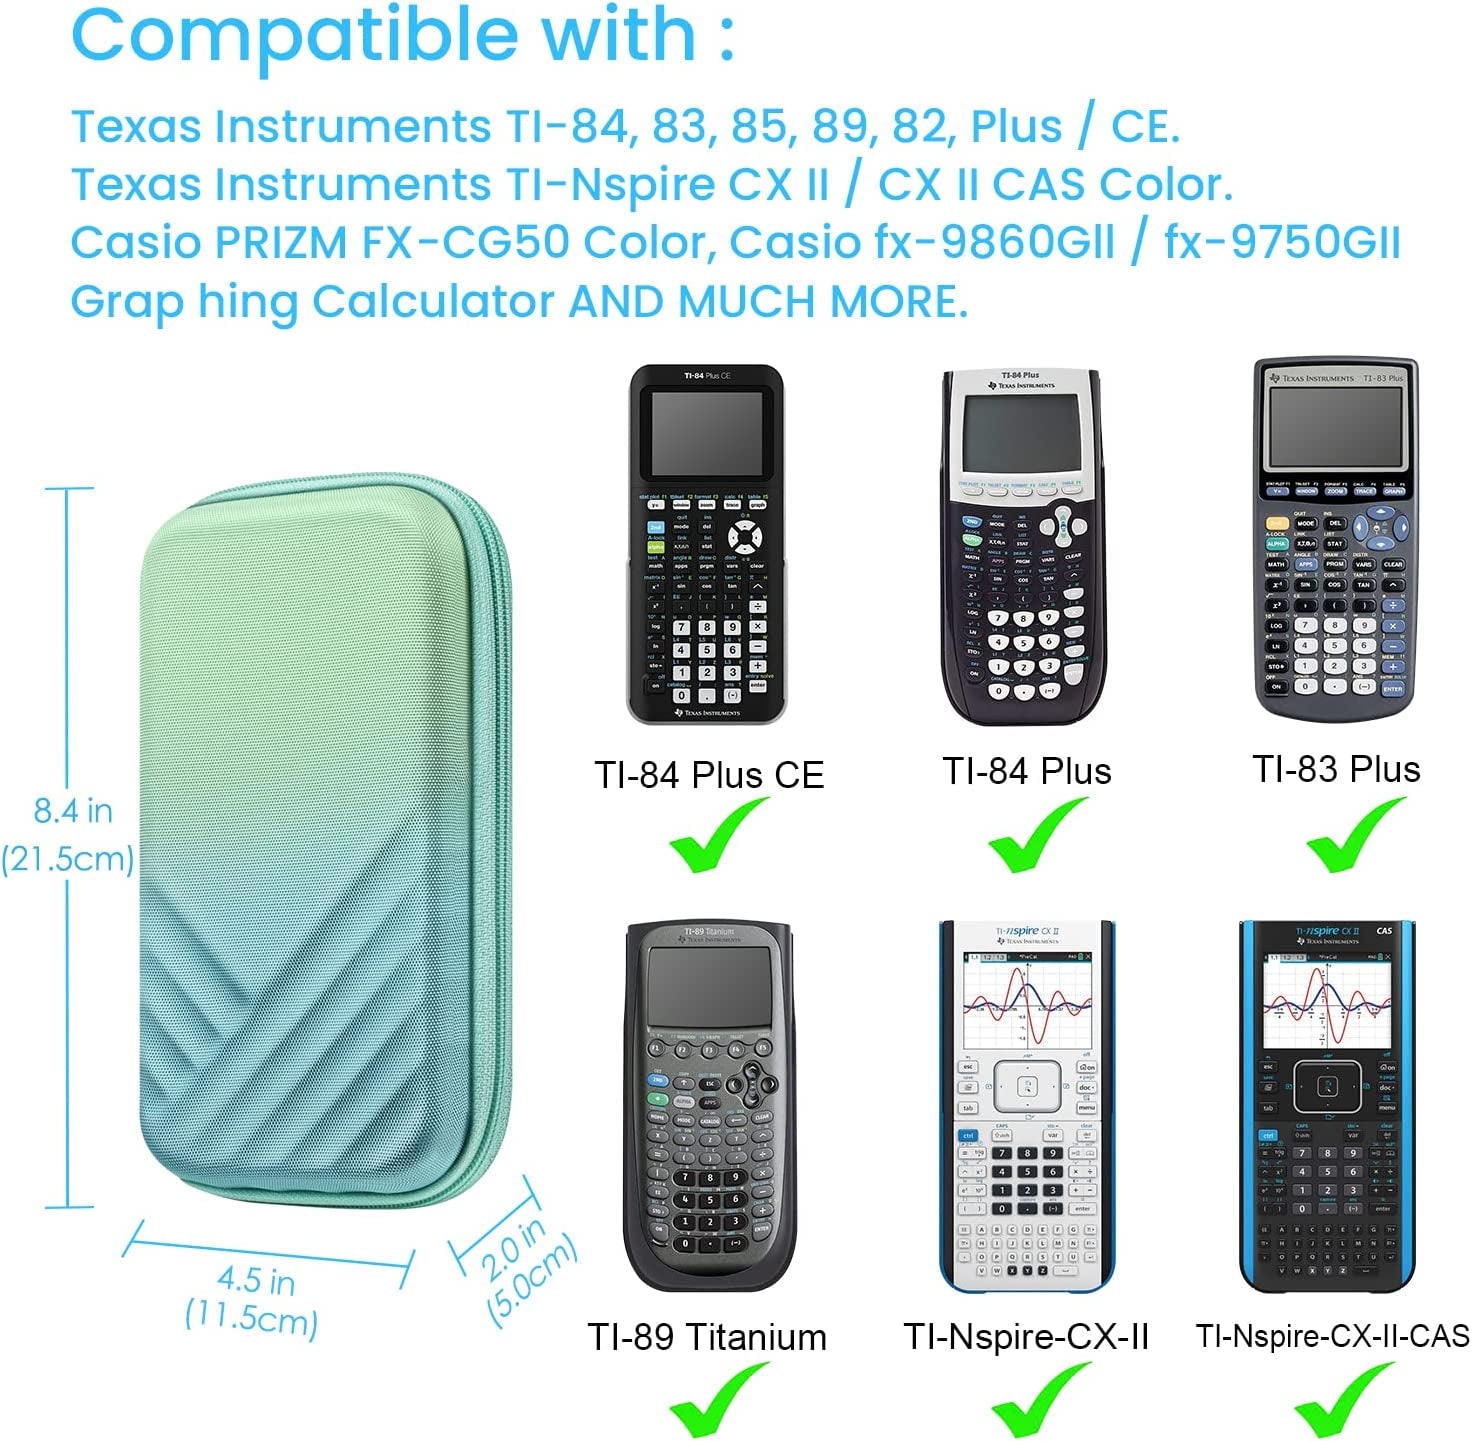 Graphing Calculator Carrying Case for Texas Instruments Ti-Nspire CX II Cas/Tl-Nspire-Cx-Ll, TI-84 plus CE/TI-84 plus Color Graphing Calculators - with Mesh Pockets, Pen Slots, Seaside Ombre